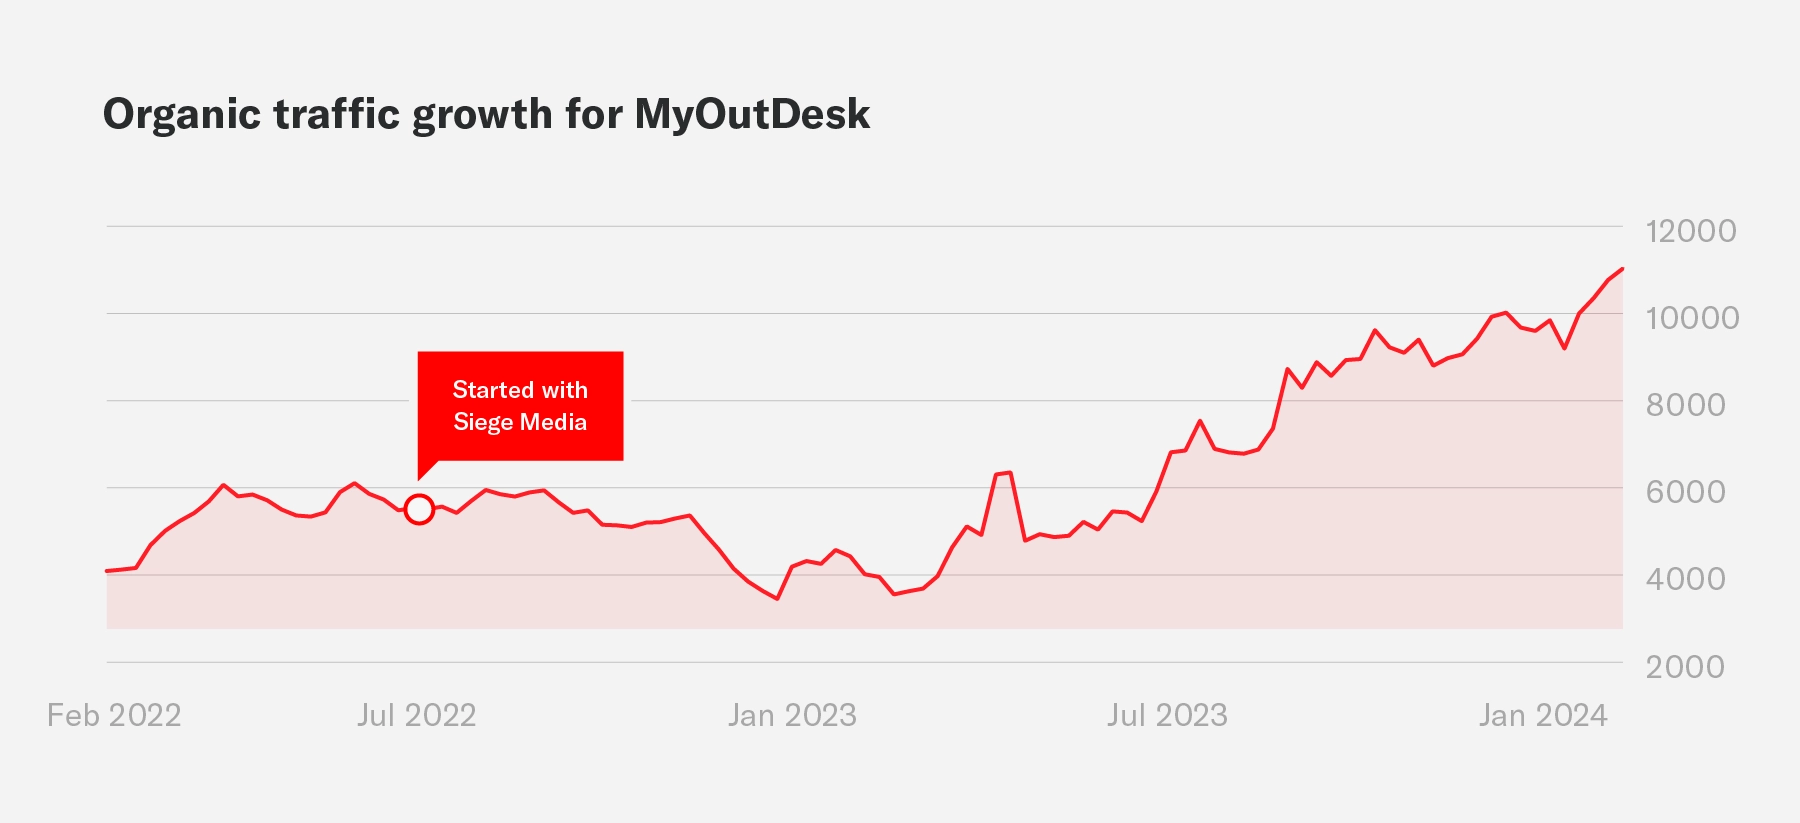 A line graph showing the organic traffic growth for MyOutDesk during an engagement with Siege Media.